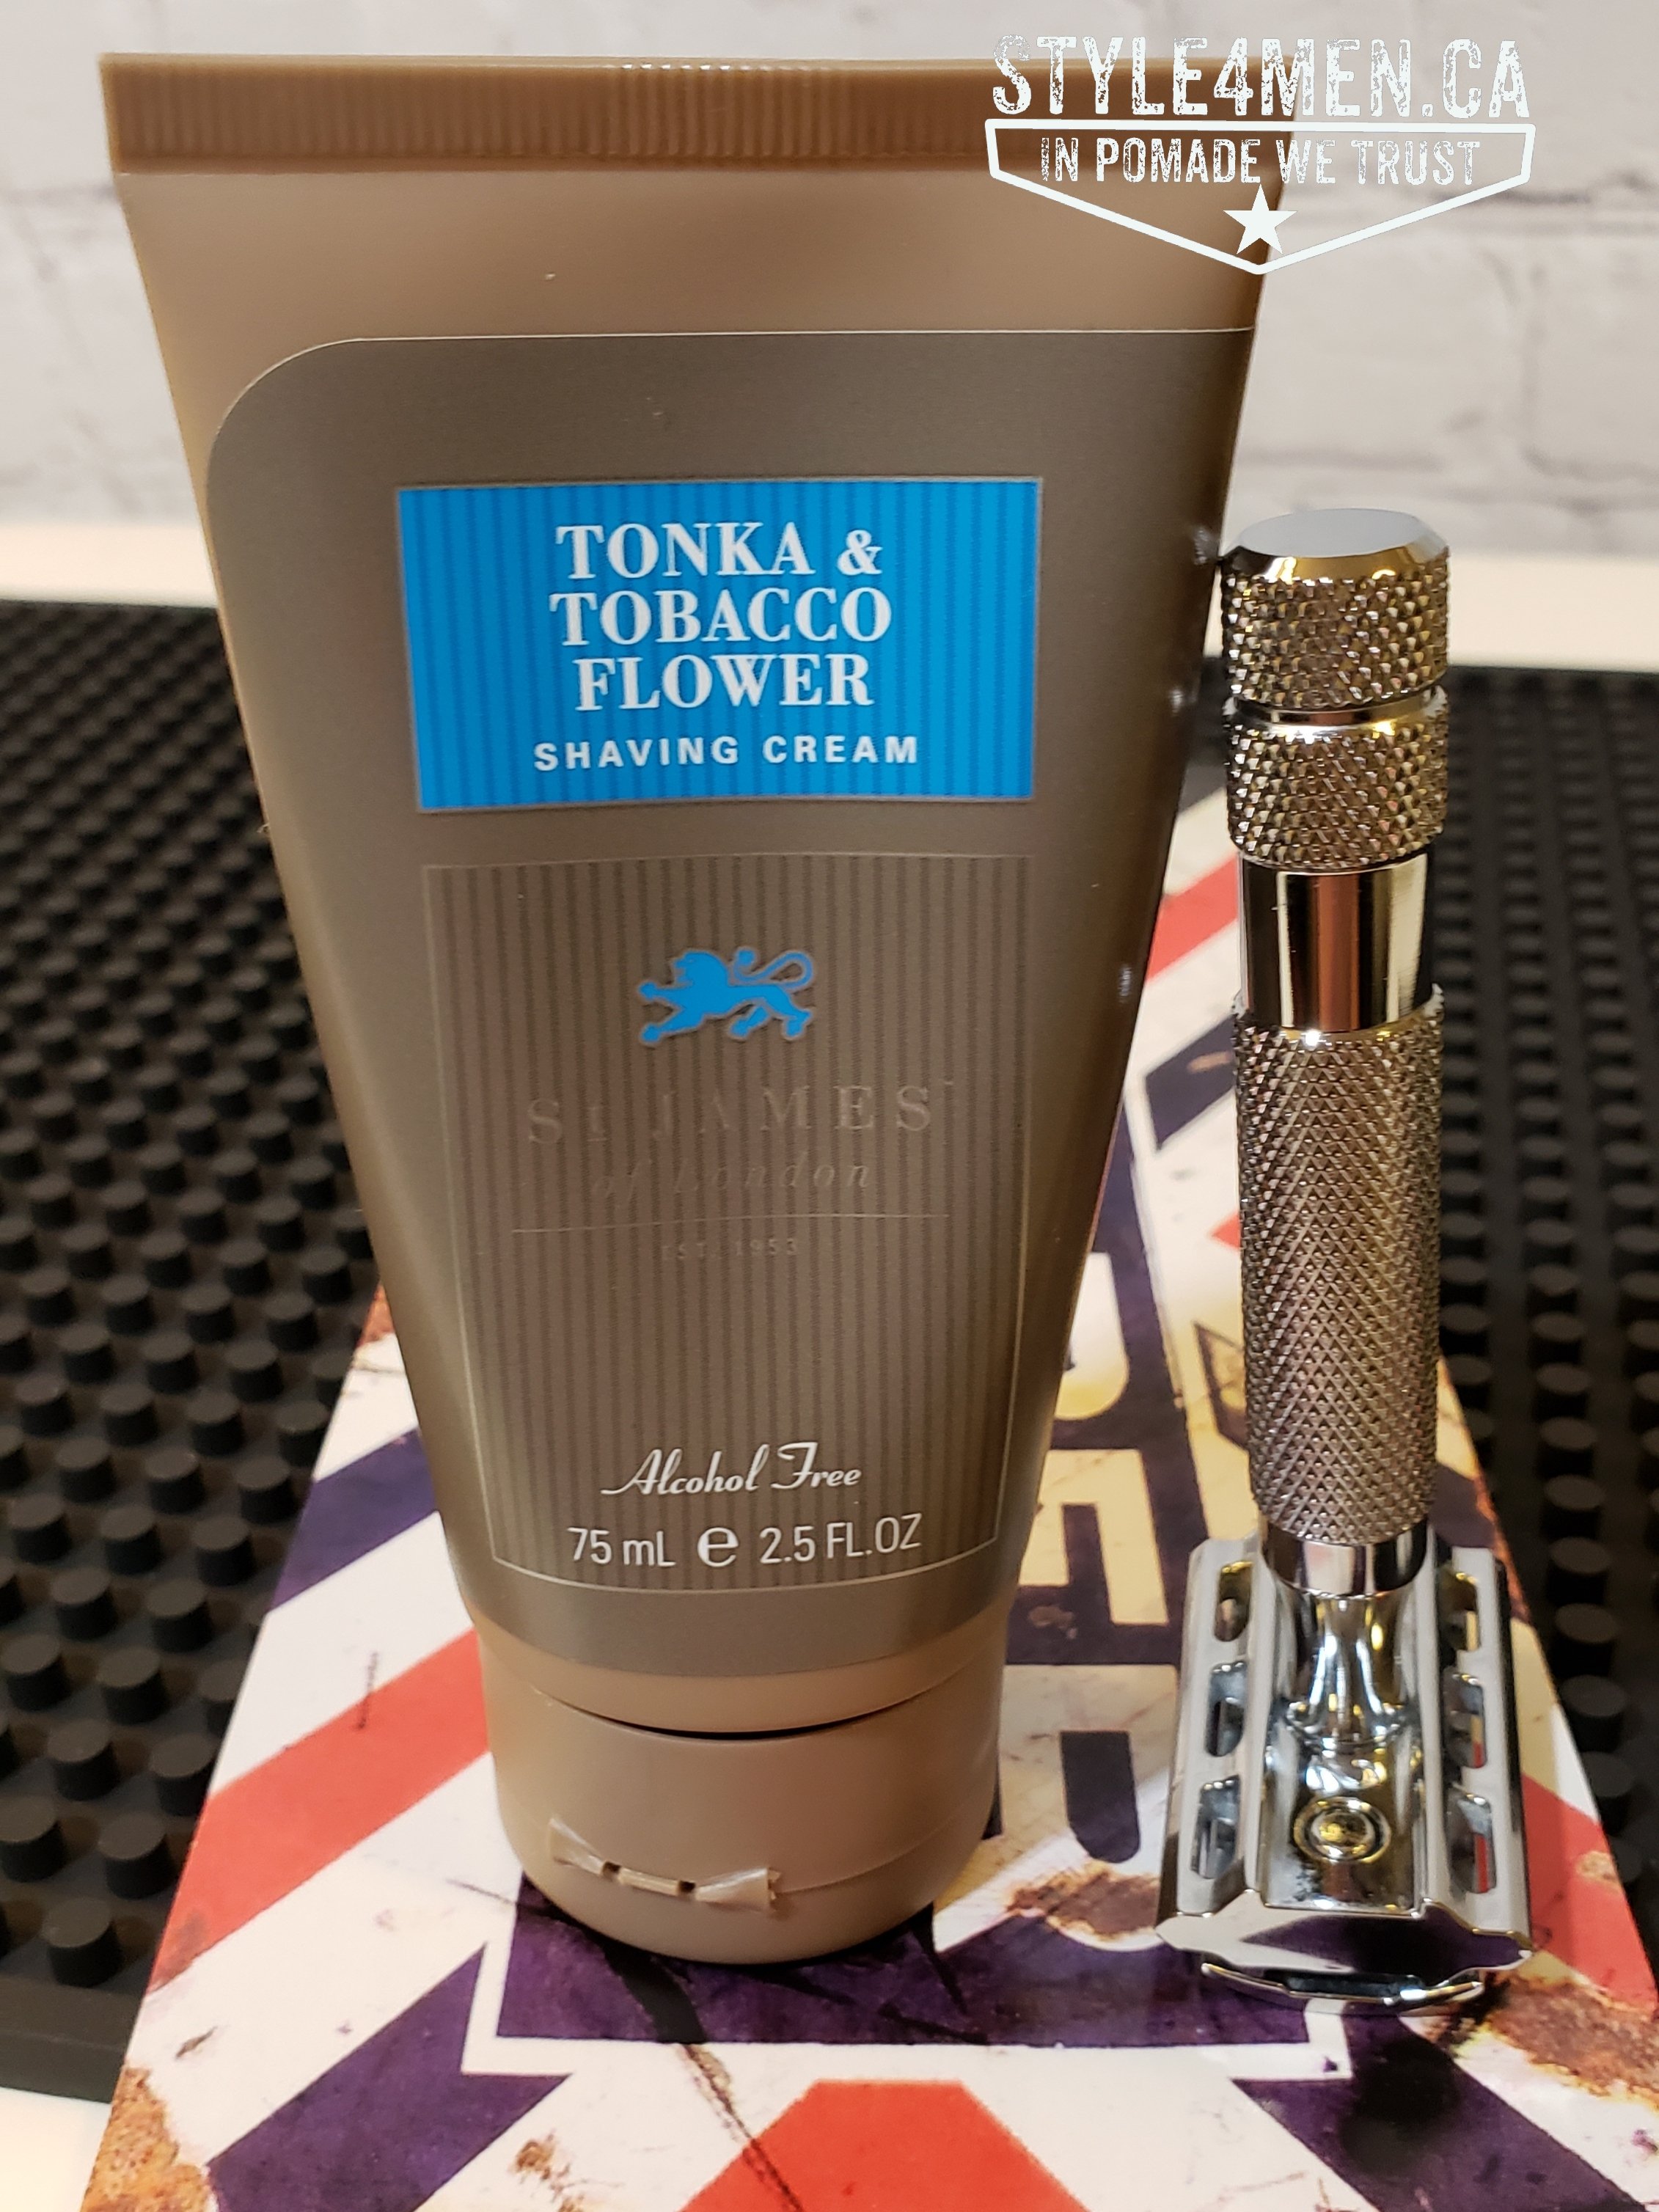 The luxurious Tonka & Tobacco Flower shaving cream by St. James